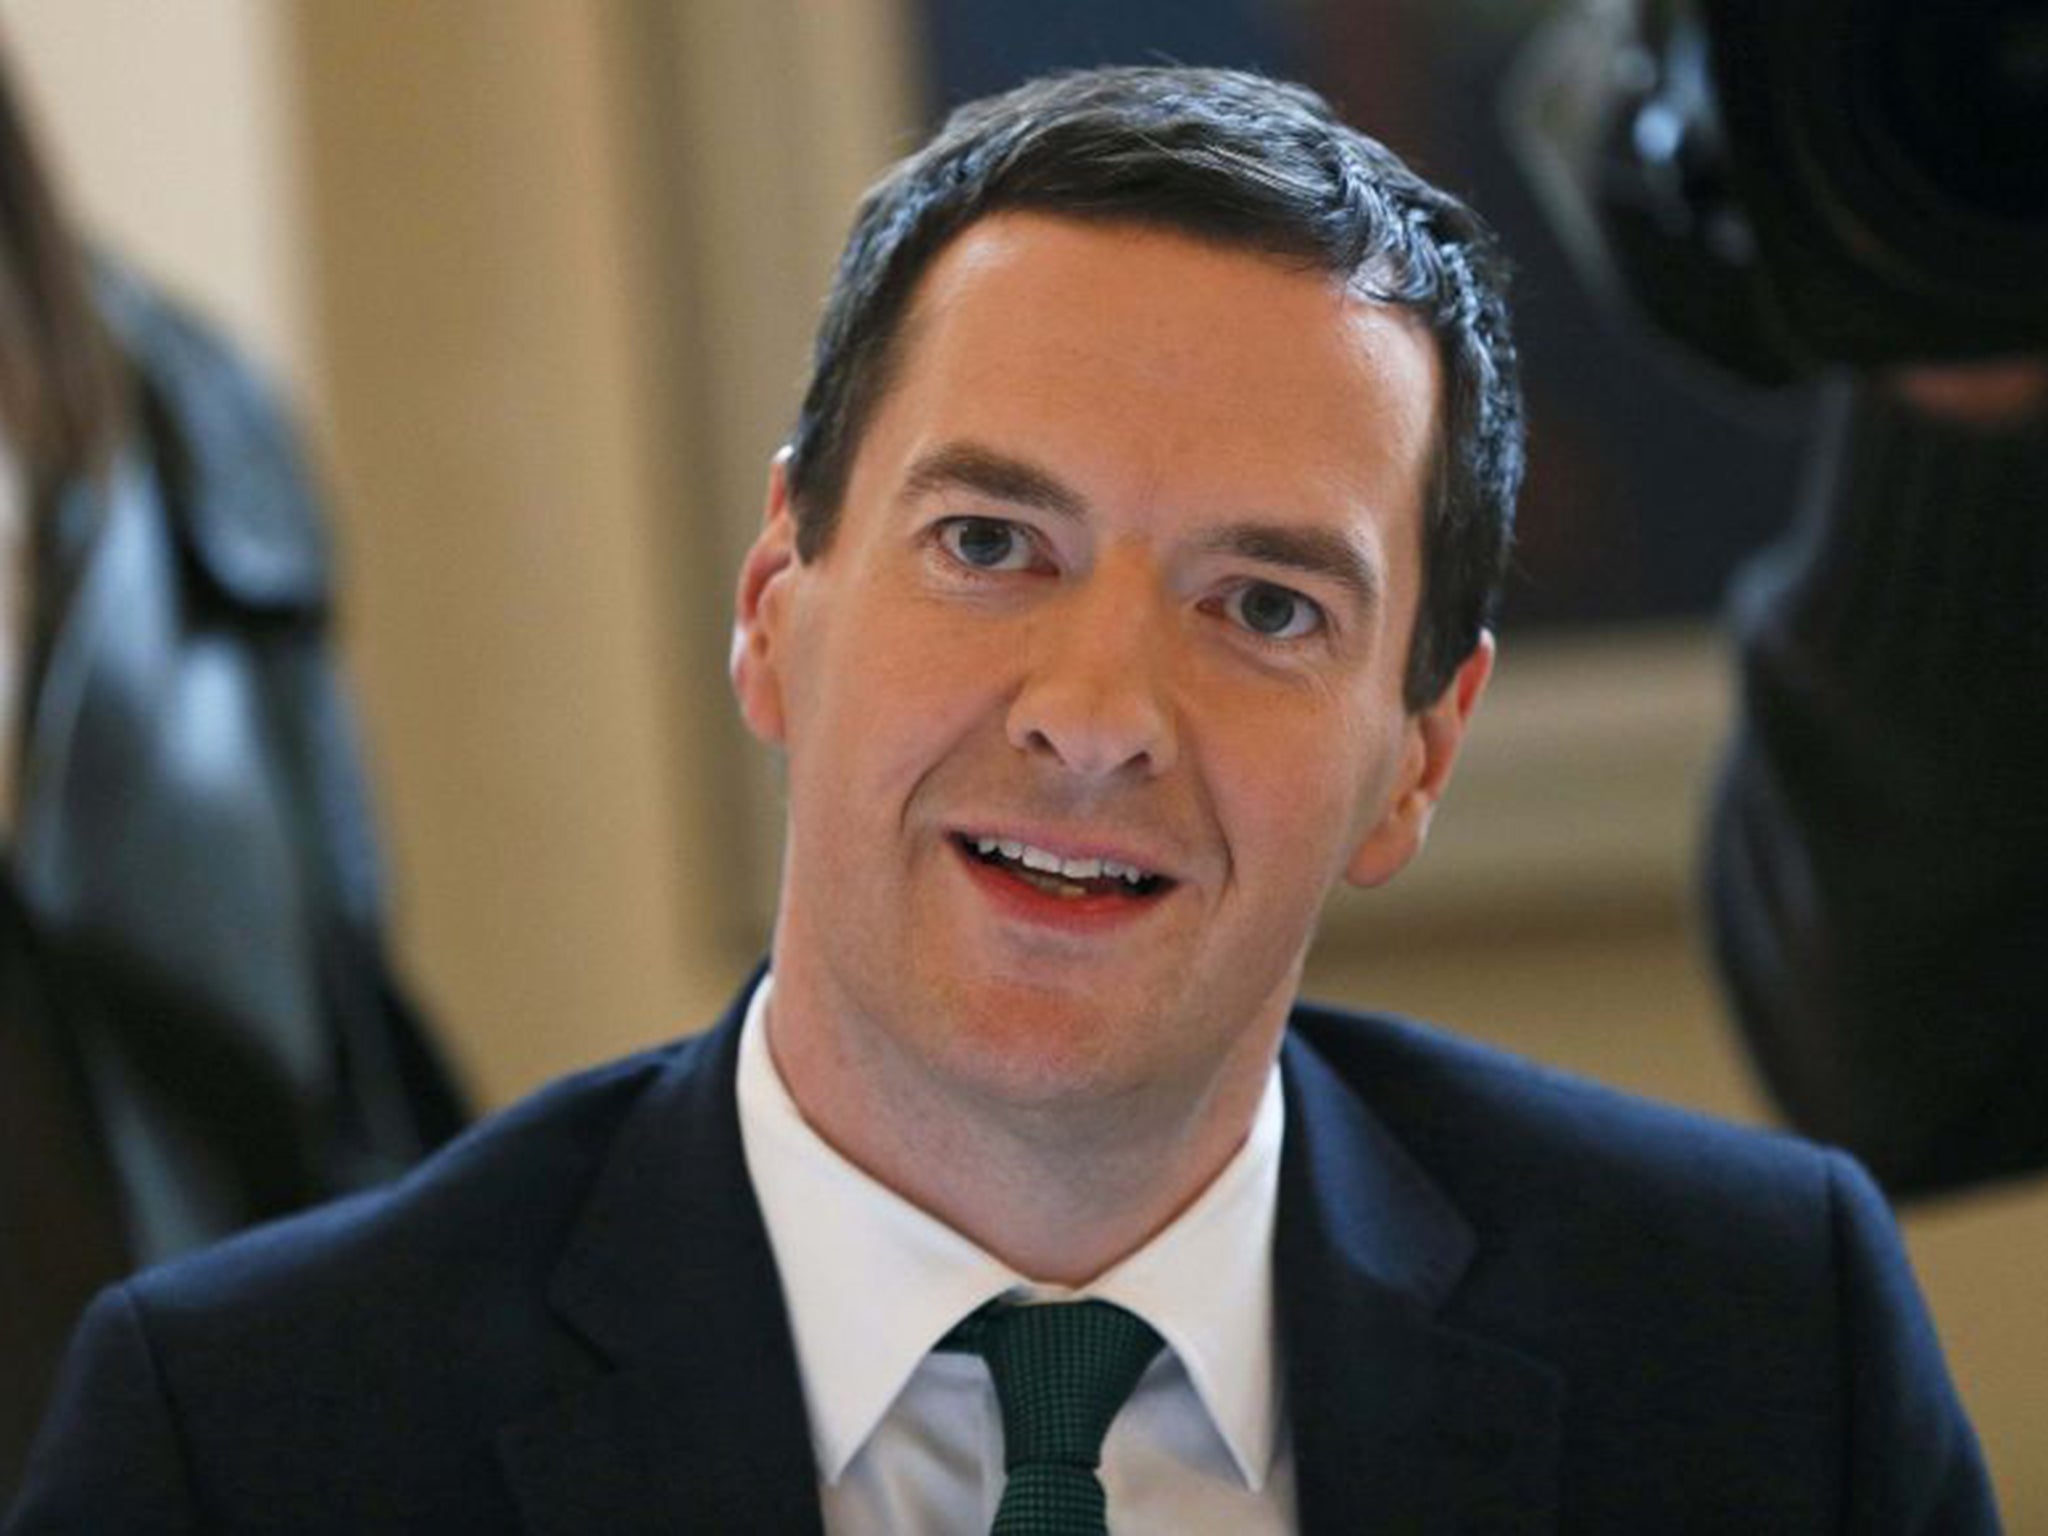 Osborne's potential tax credit cuts could overwhelm HMRC's systems